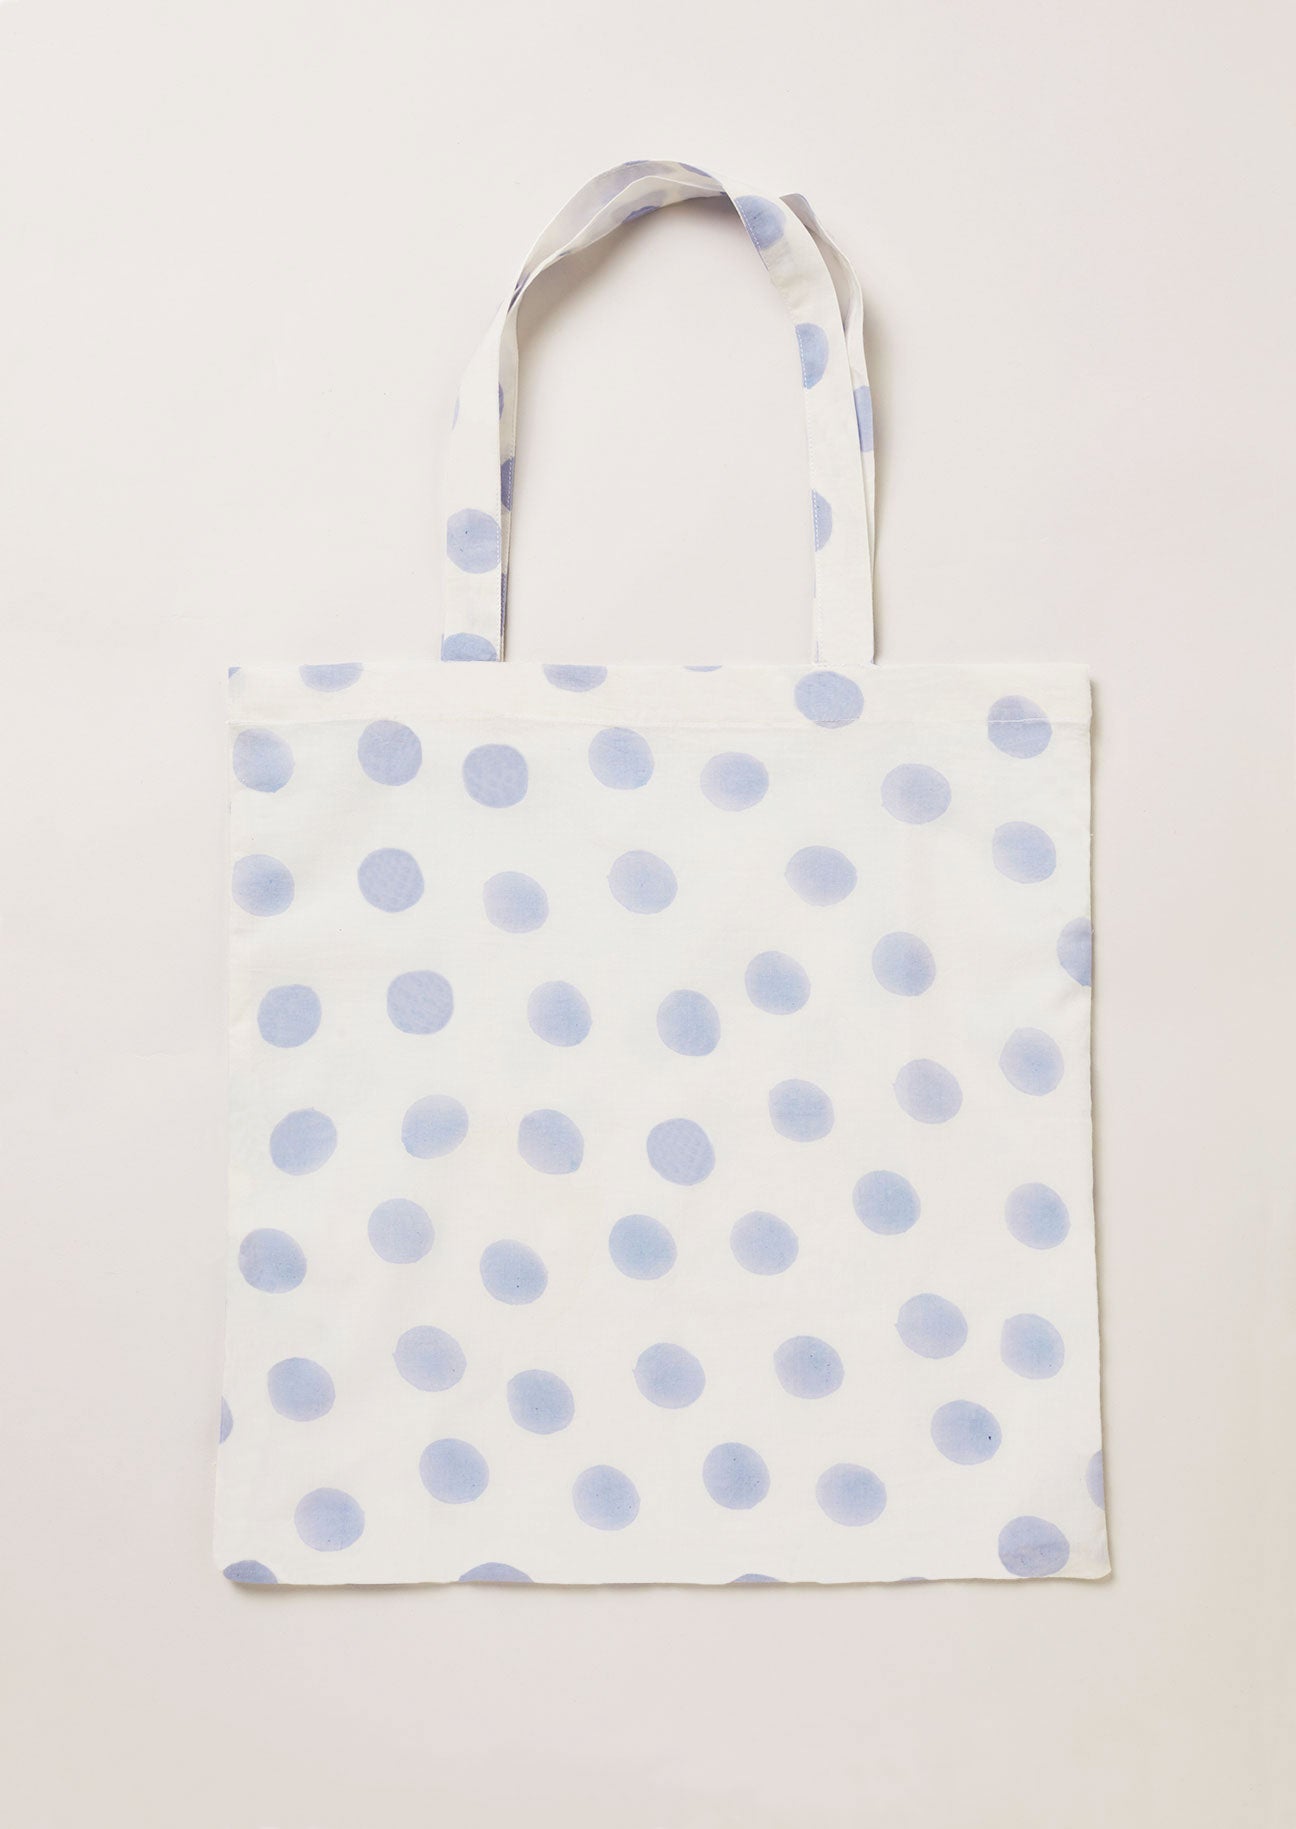 Block printed cotton tote bag in blue dot and white ground.